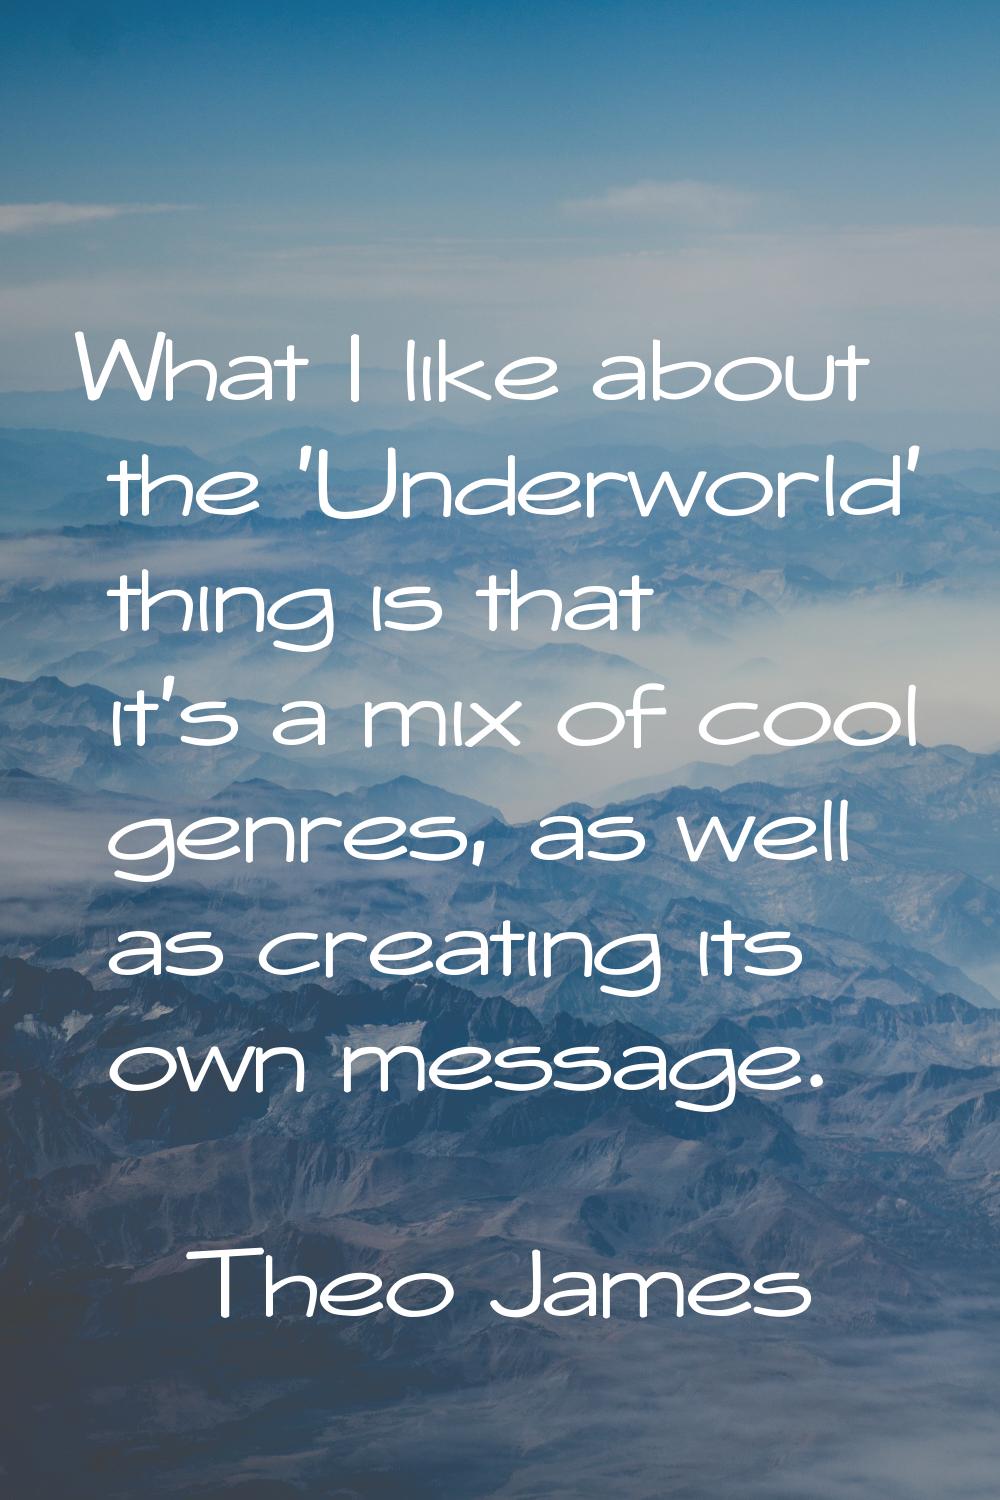 What I like about the 'Underworld' thing is that it's a mix of cool genres, as well as creating its